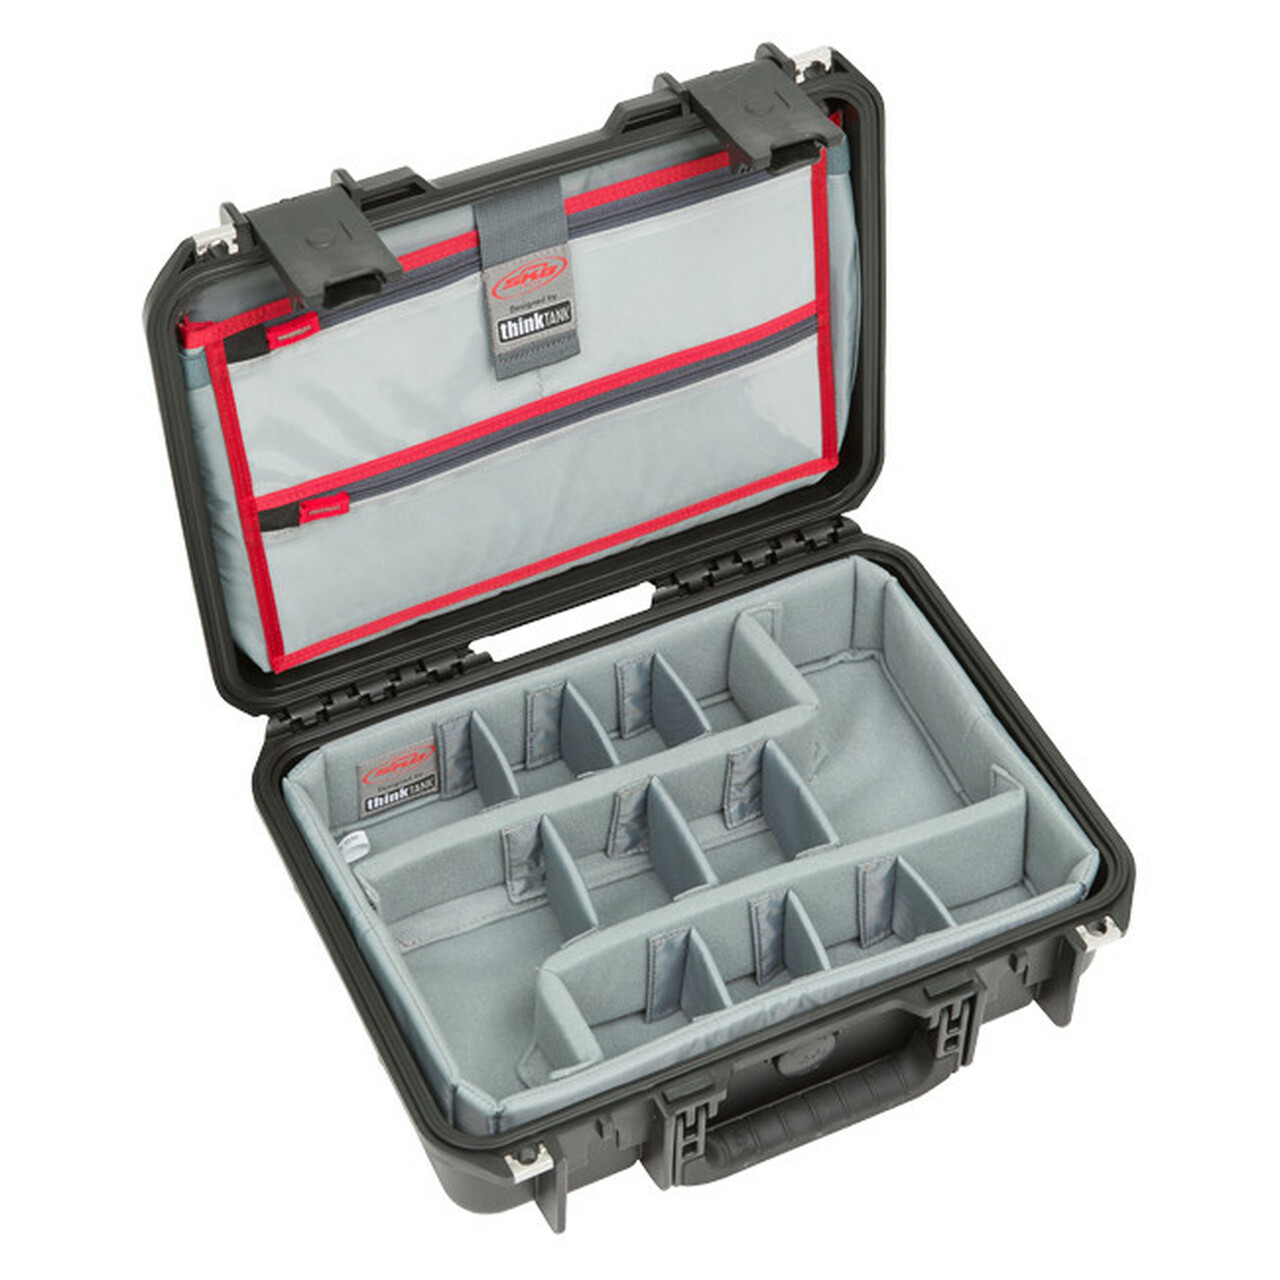 SKB 1540 with Think Tank Dividers